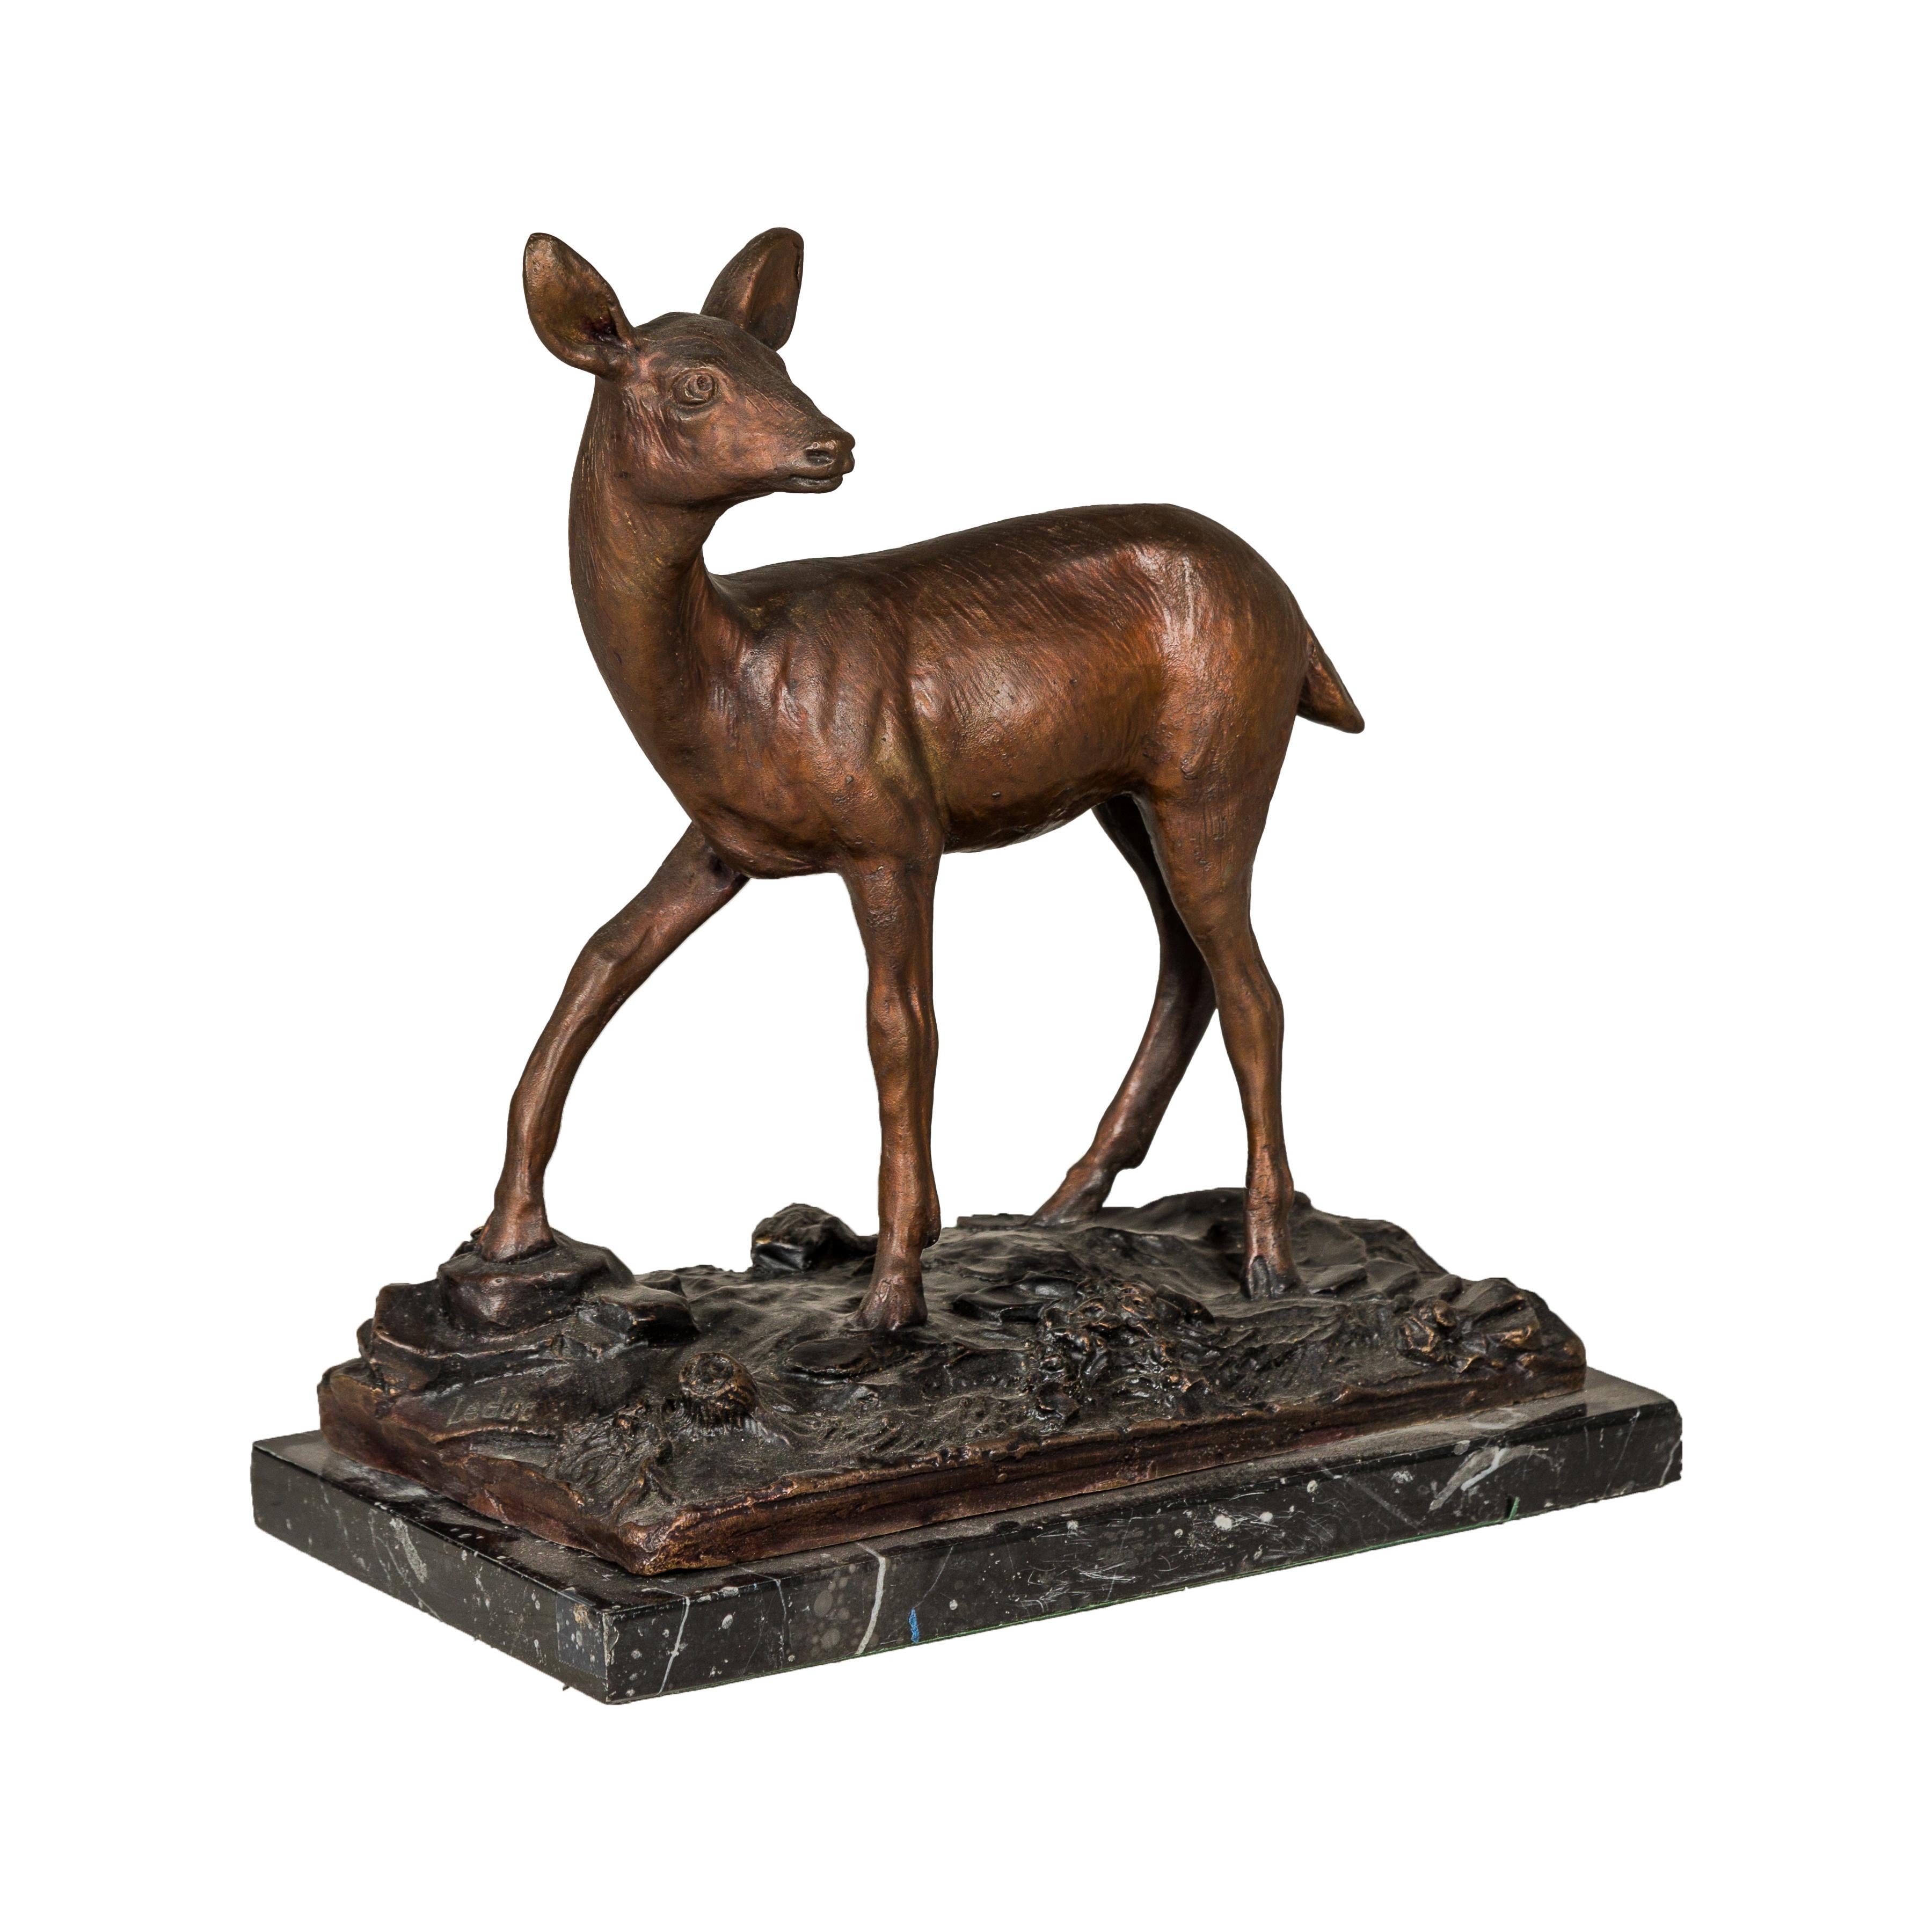 A vintage bronze deer sculpture mounted on a bronze and black marble base. This vintage bronze deer sculpture, elegantly mounted on a unique base that combines bronze and black marble, is a magnificent blend of artistry and natural elegance. The